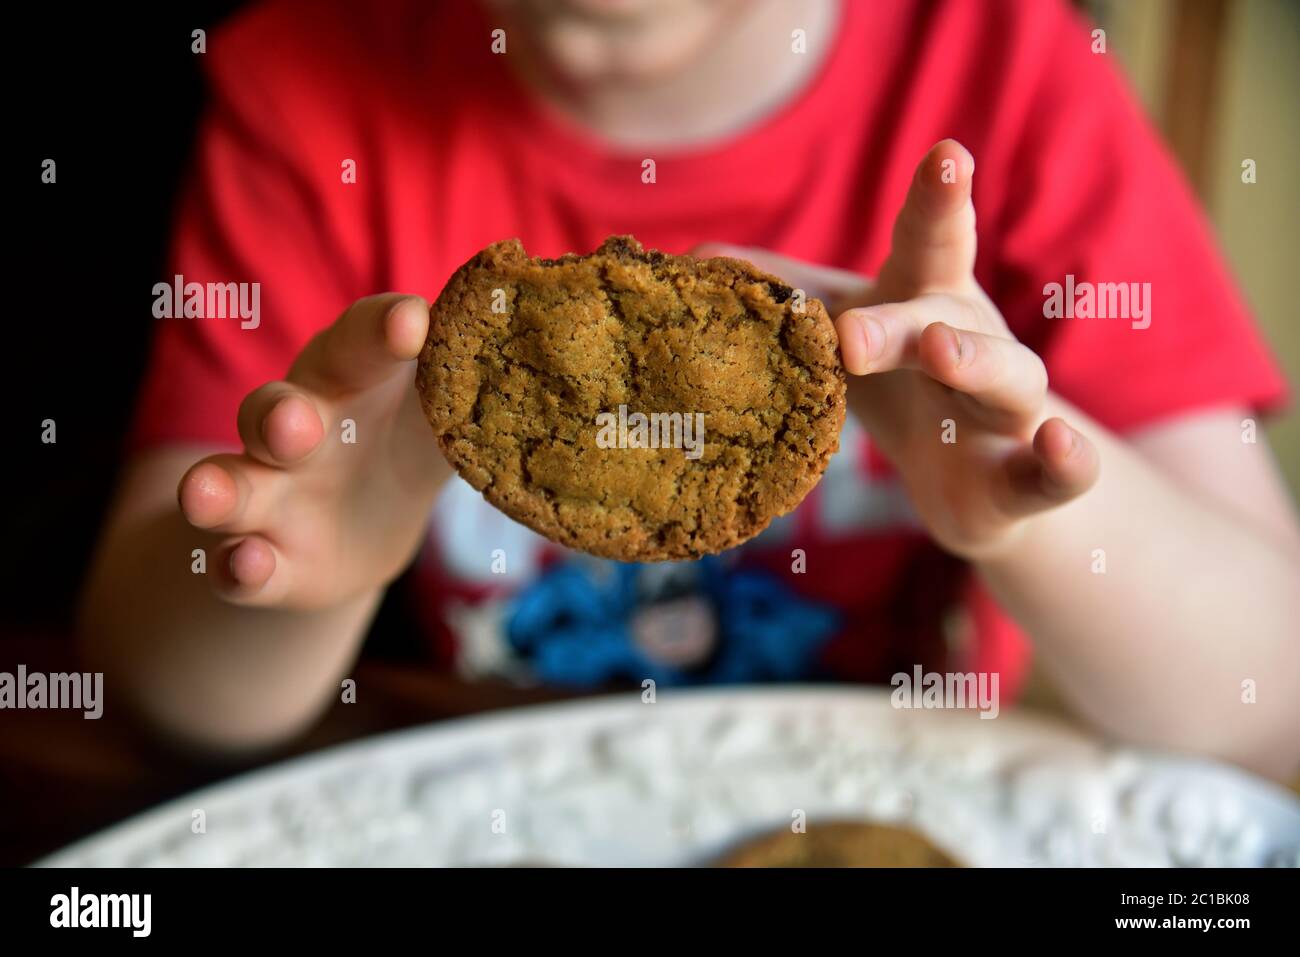 A primary school pupil is pictured baking chocolate chip cookies as part of his home schooling in lockdown during the Covid-19 pandemic Stock Photo